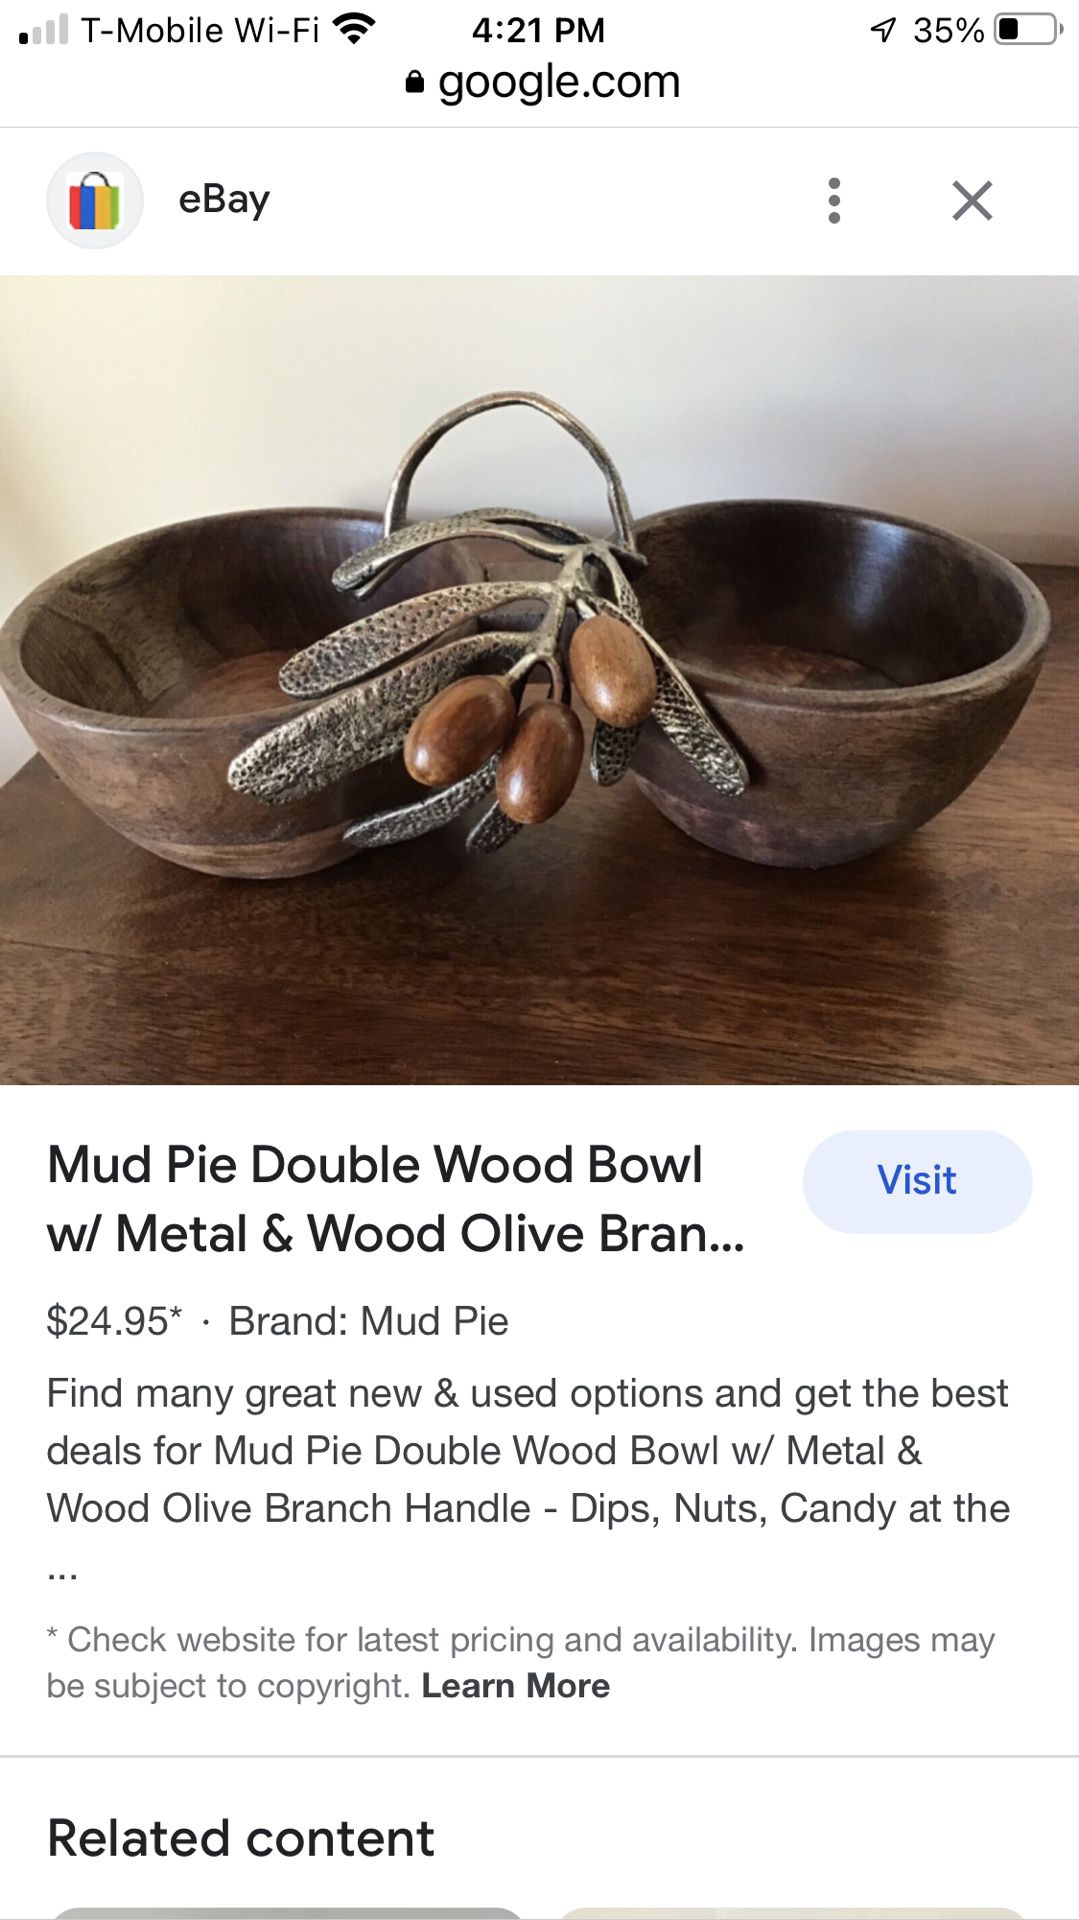 Mud Pie Double Wood Bowl w/ Metal & Wood Olive Branch Handle - Dips, Nuts, Candy